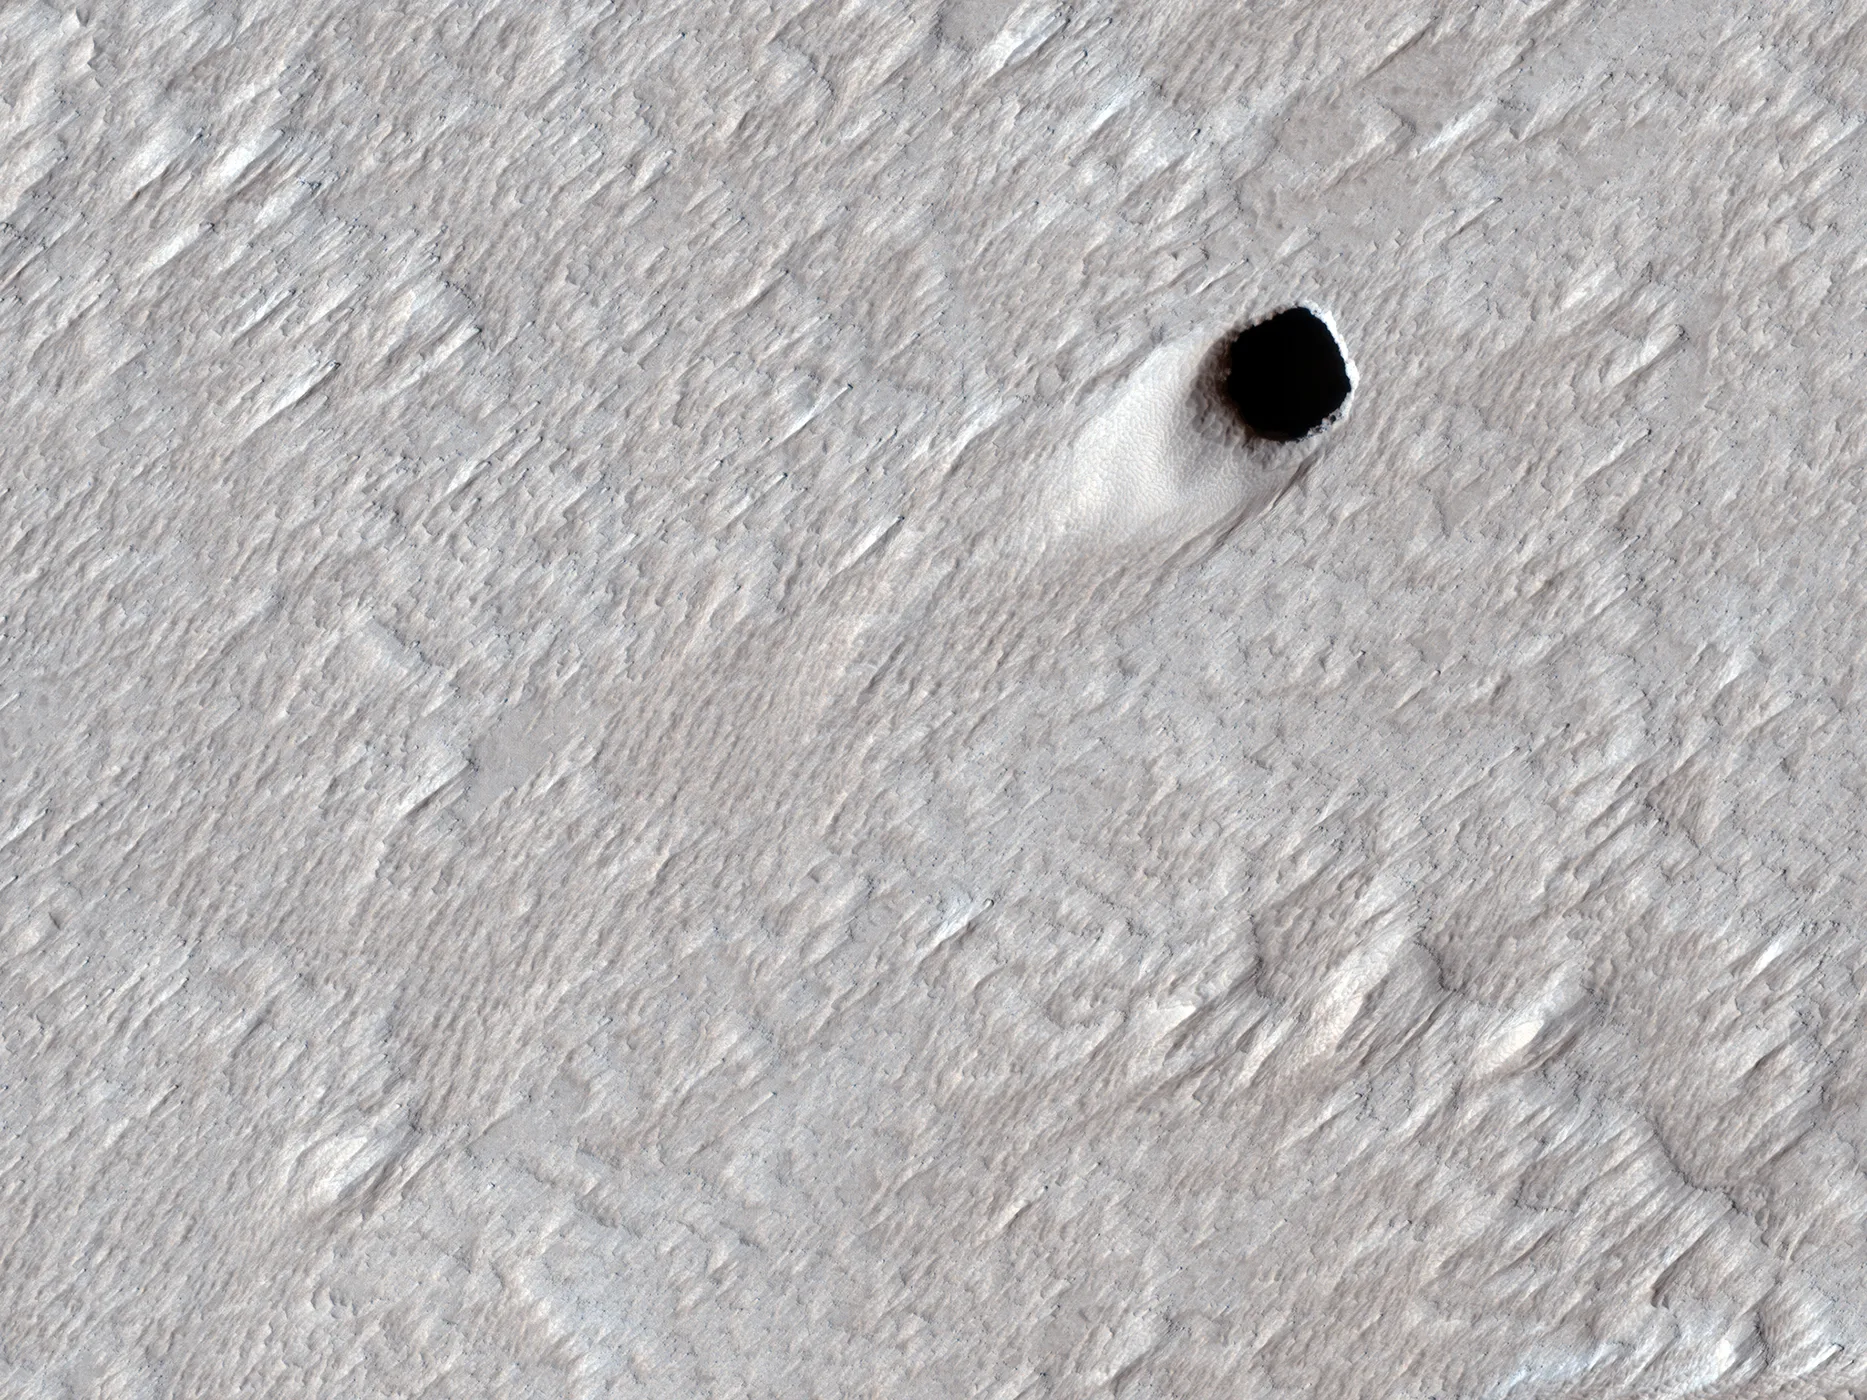 For The First Time, Water Frost Was Spotted Near Mars’s Equator